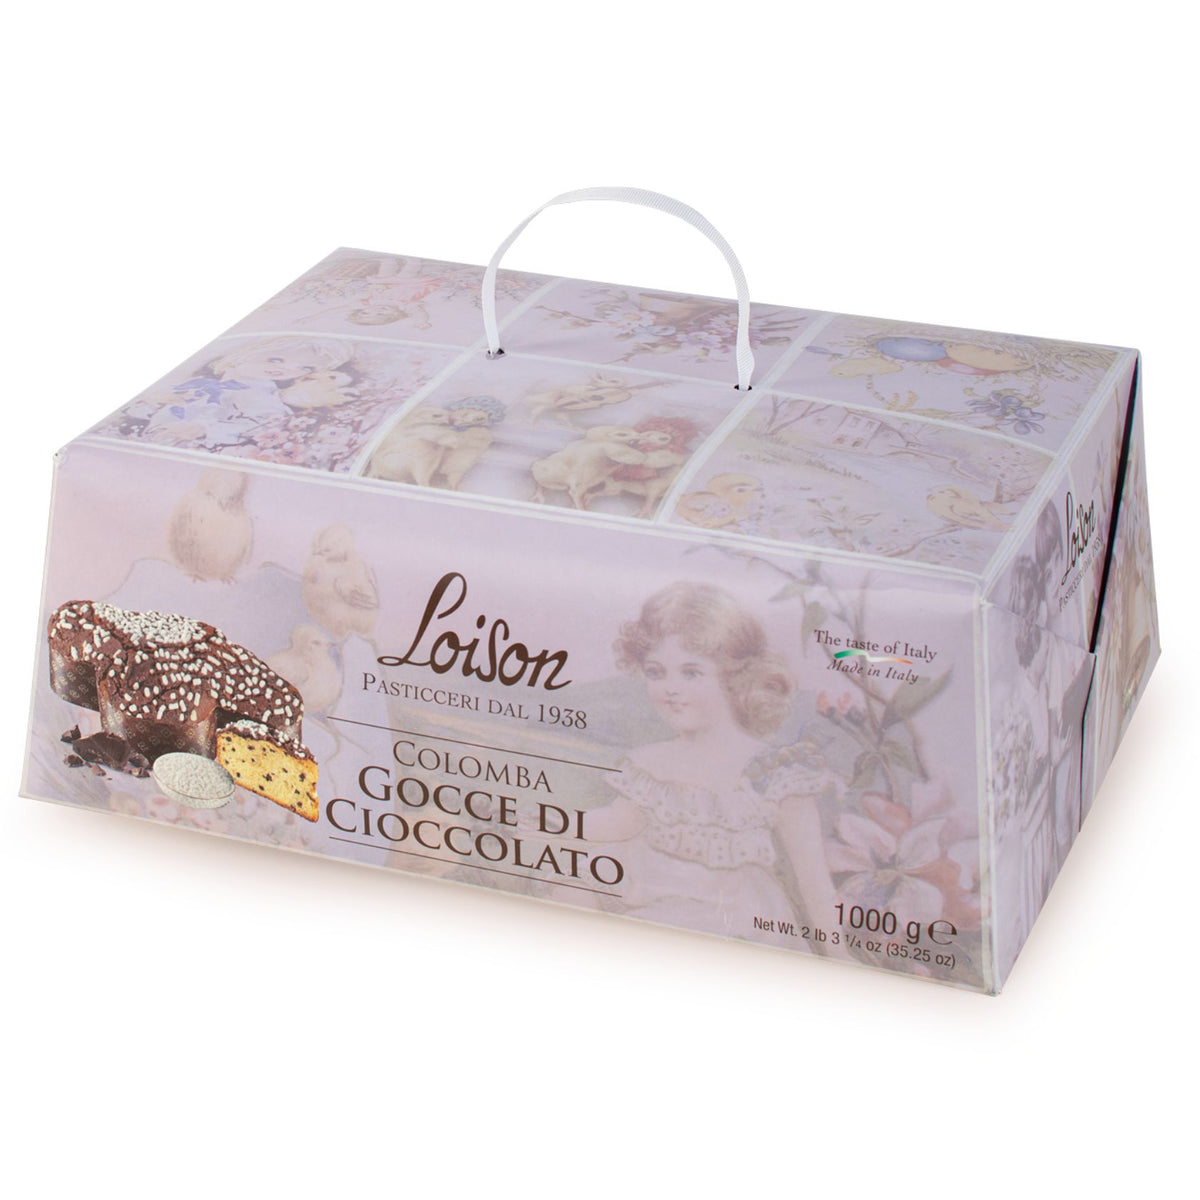 Loison Everyday Collection Chocolate Colomba 1KG  | Imported and distributed in the UK by Just Gourmet Foods